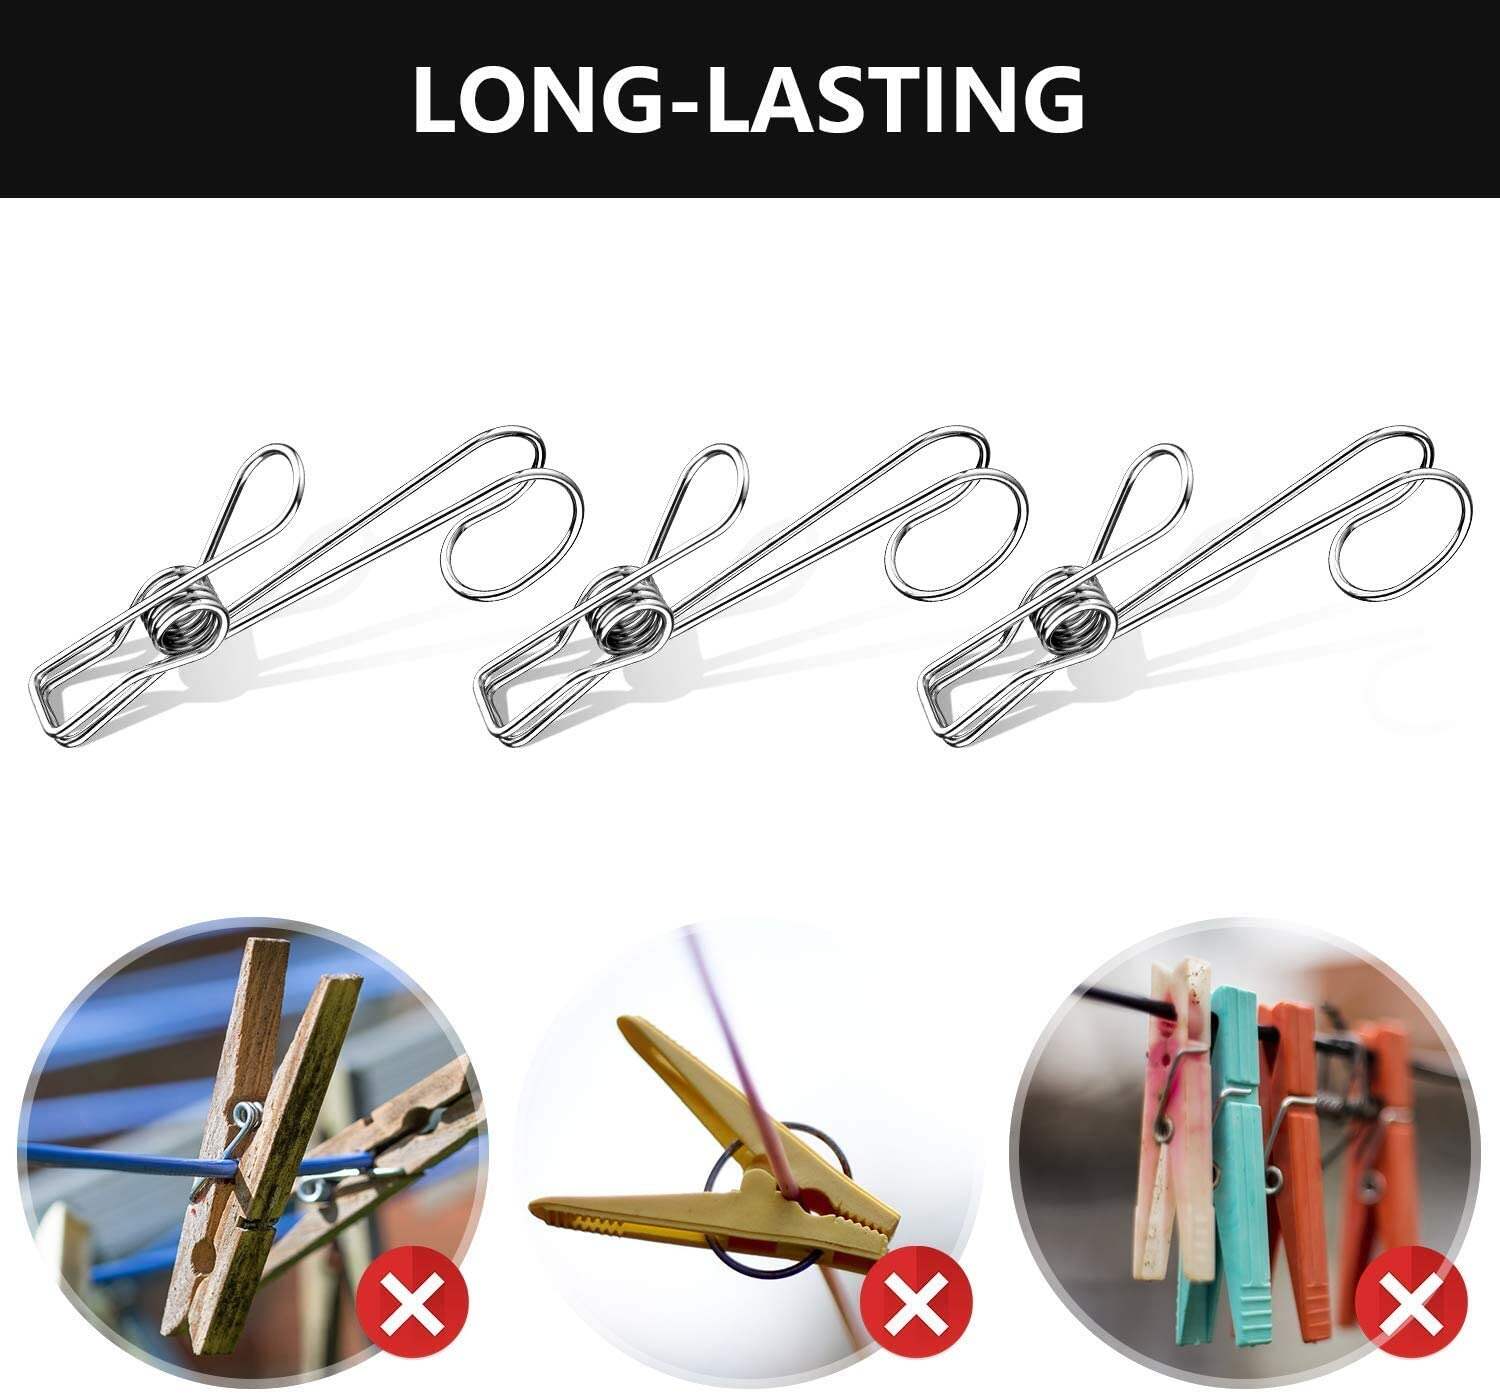 Early Summer Hot Sale 48% OFF - 304 Stainless Steel Metal Long Tail Clip(5 pcs/set)BUY 3 GET 1 FREE NOW